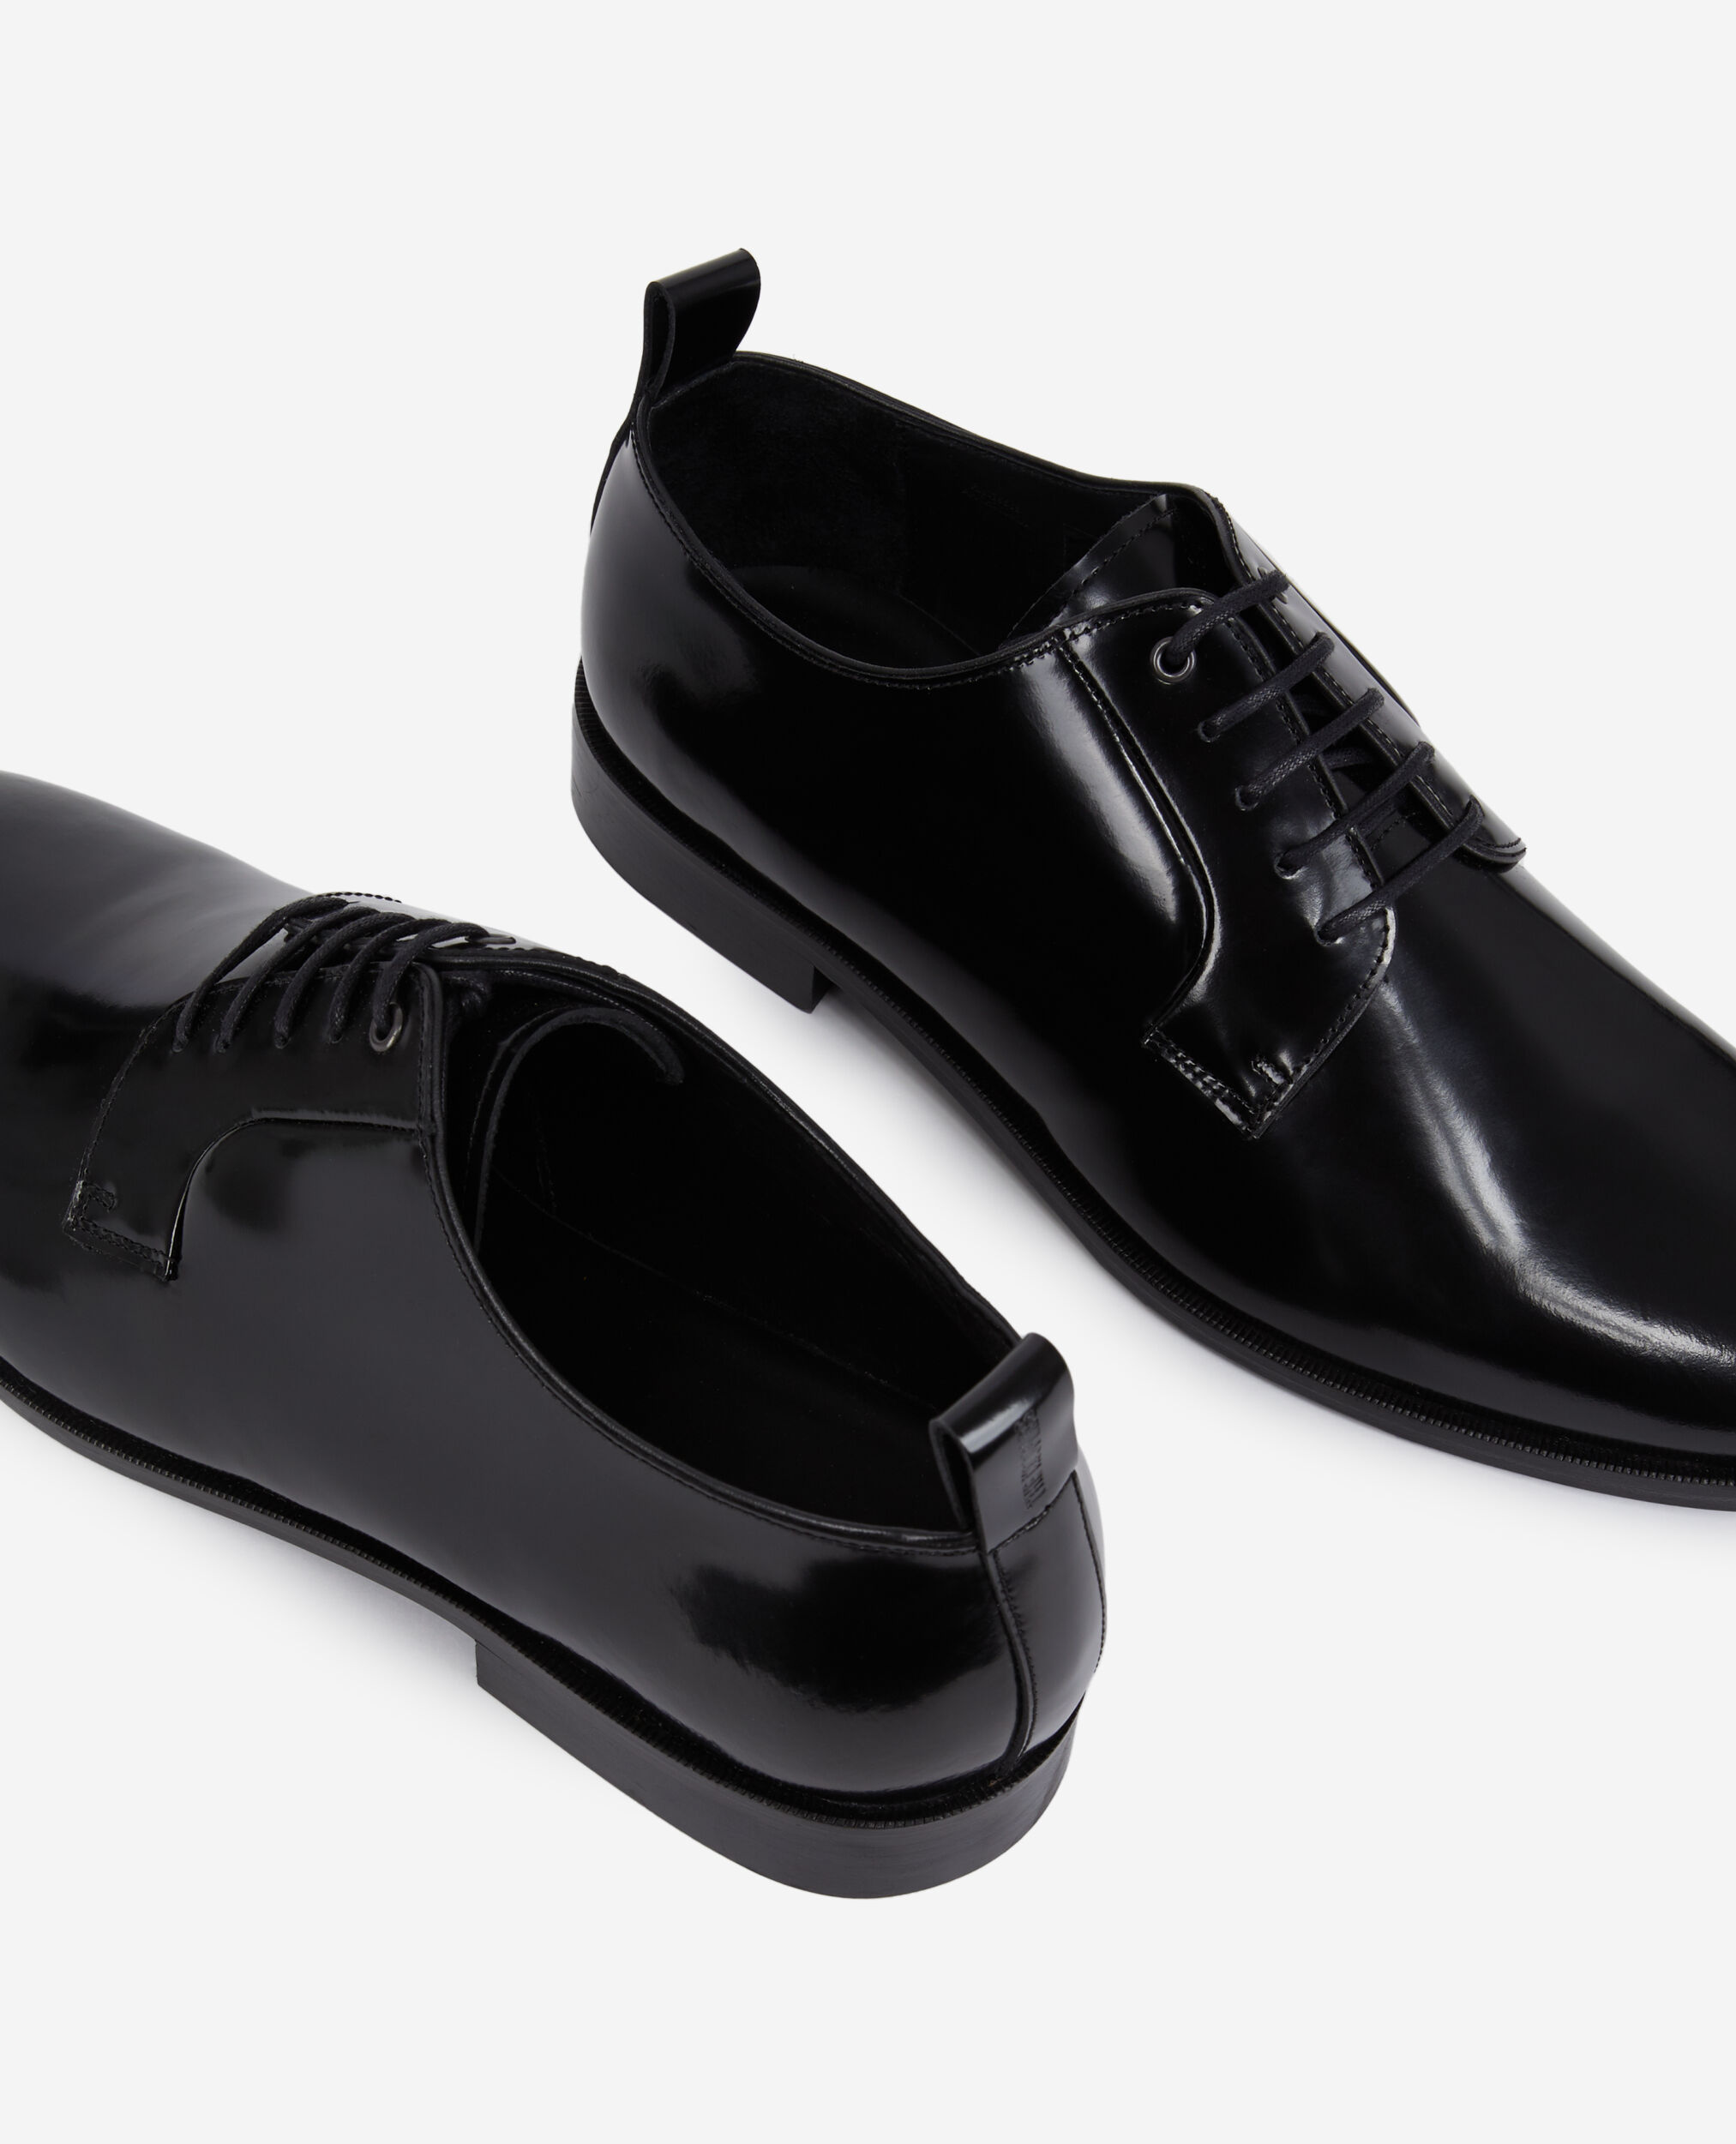 Black patent leather shoes | The Kooples - US